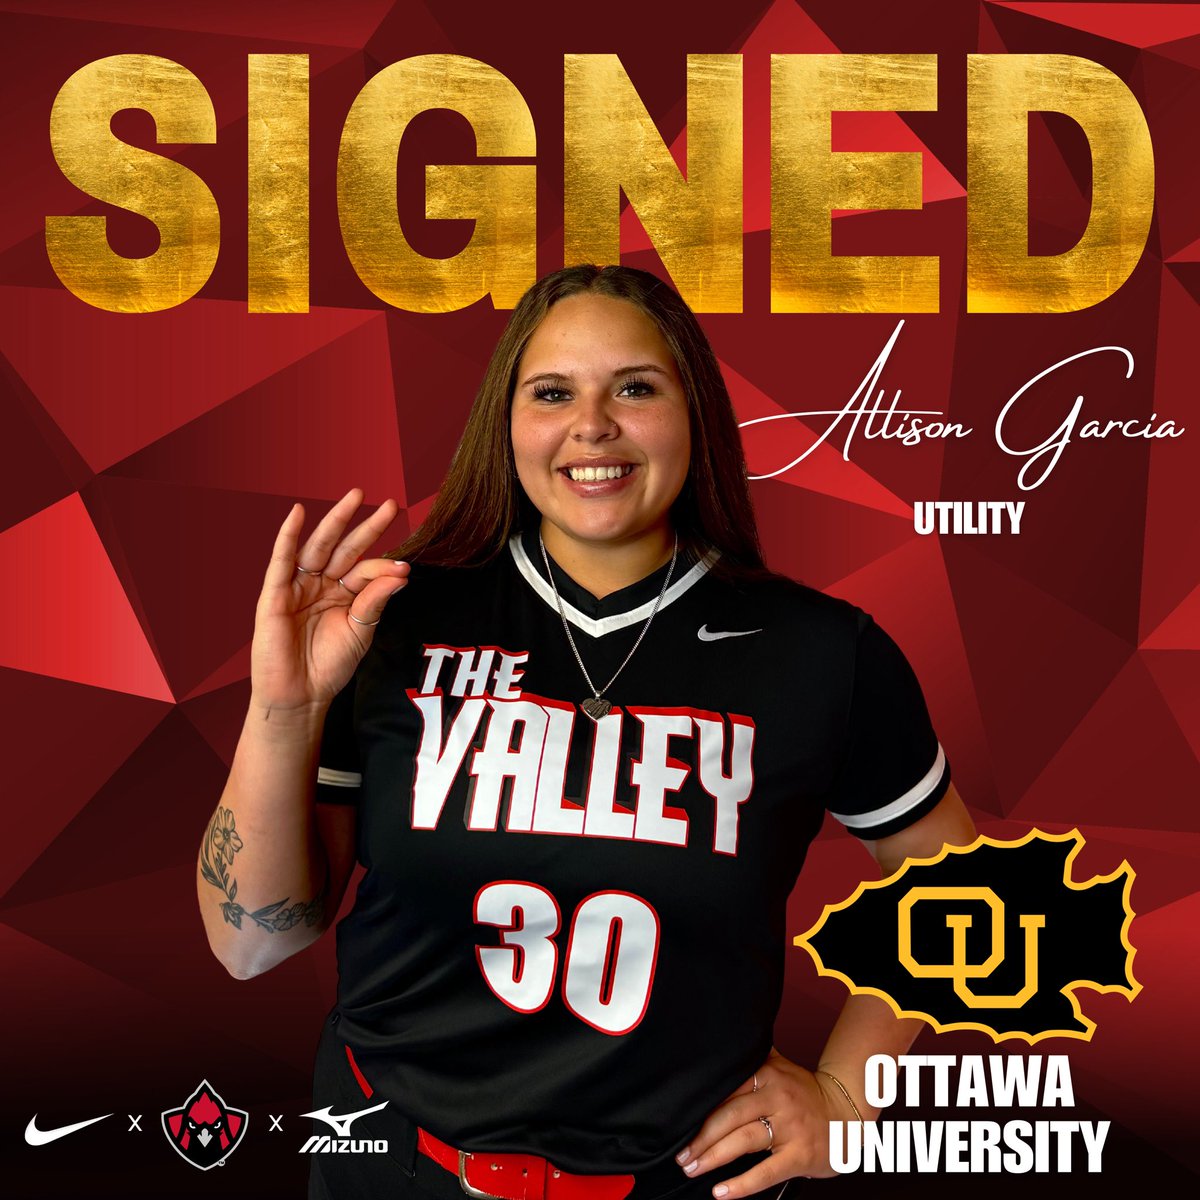 Trading in the red and black for black and gold, Allison is headed to Ottawa! Let’s go Chuck! #CardinalNation | #BirdGang